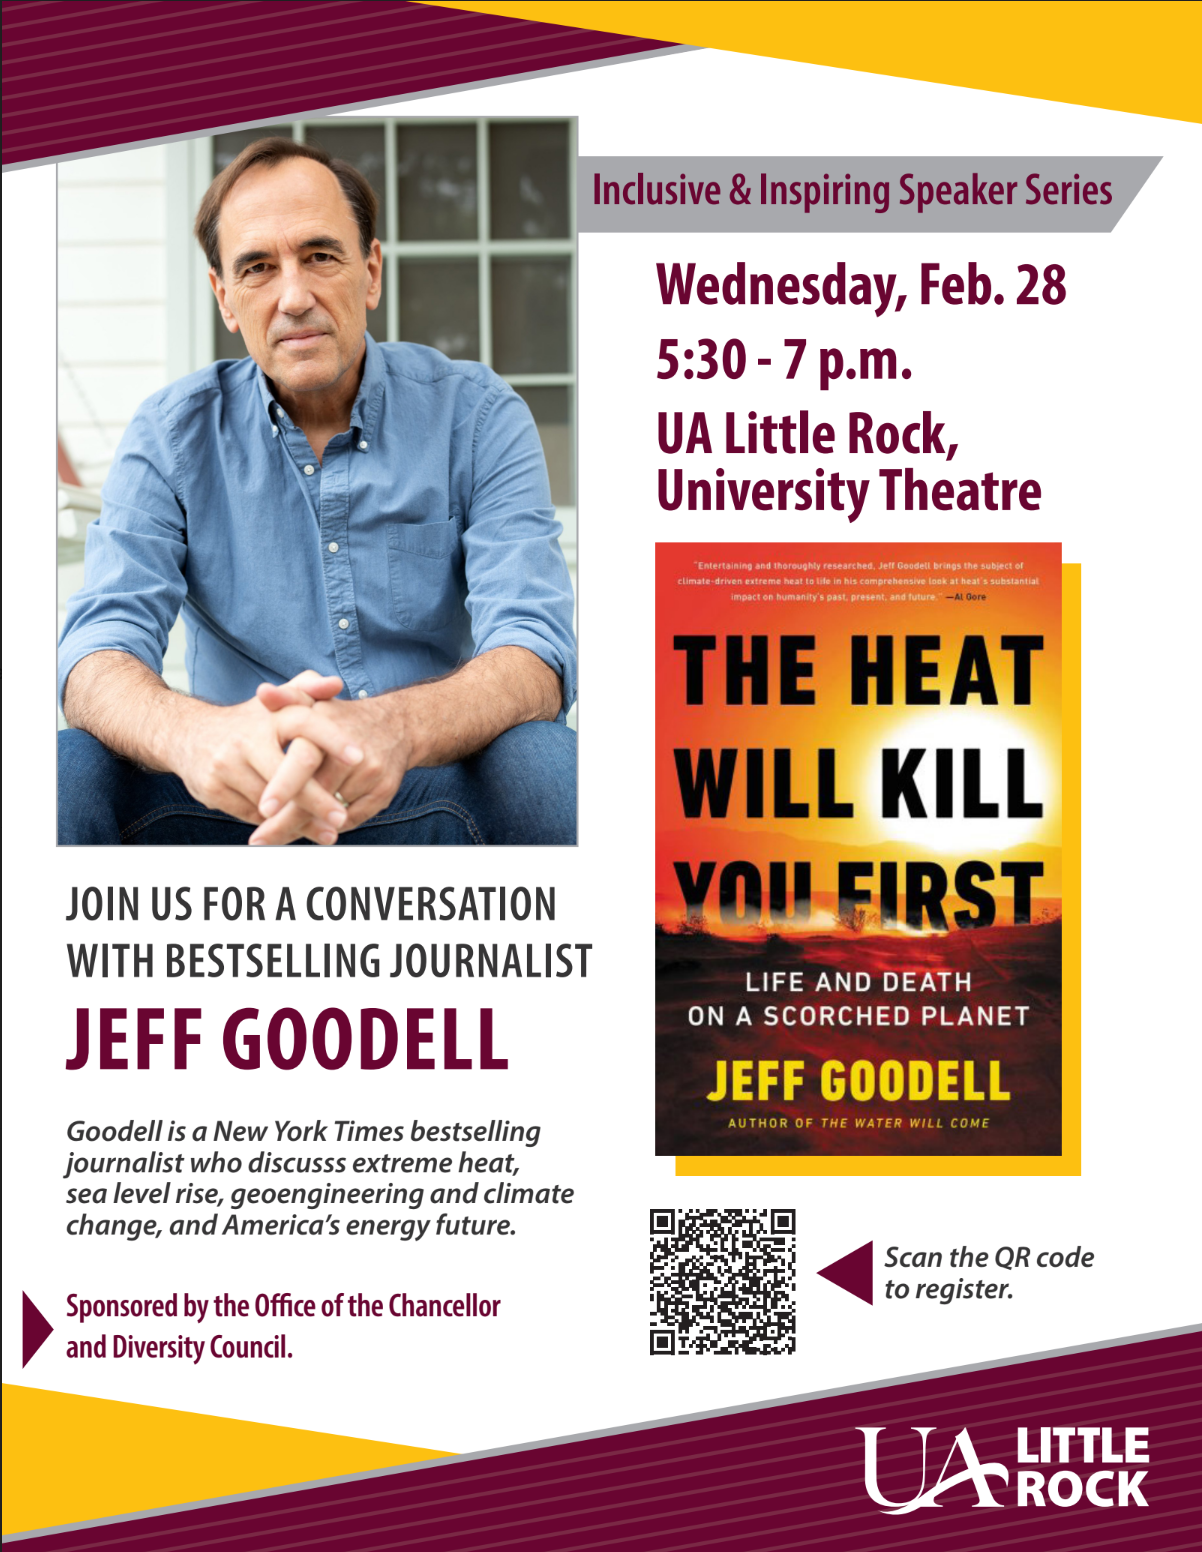 UA Little Rock will host a special visit by award-winning journalist and best-selling author Jeff Goodell as part of the university’s third annual Inclusive & Inspiring Speaker Series on Feb. 28.